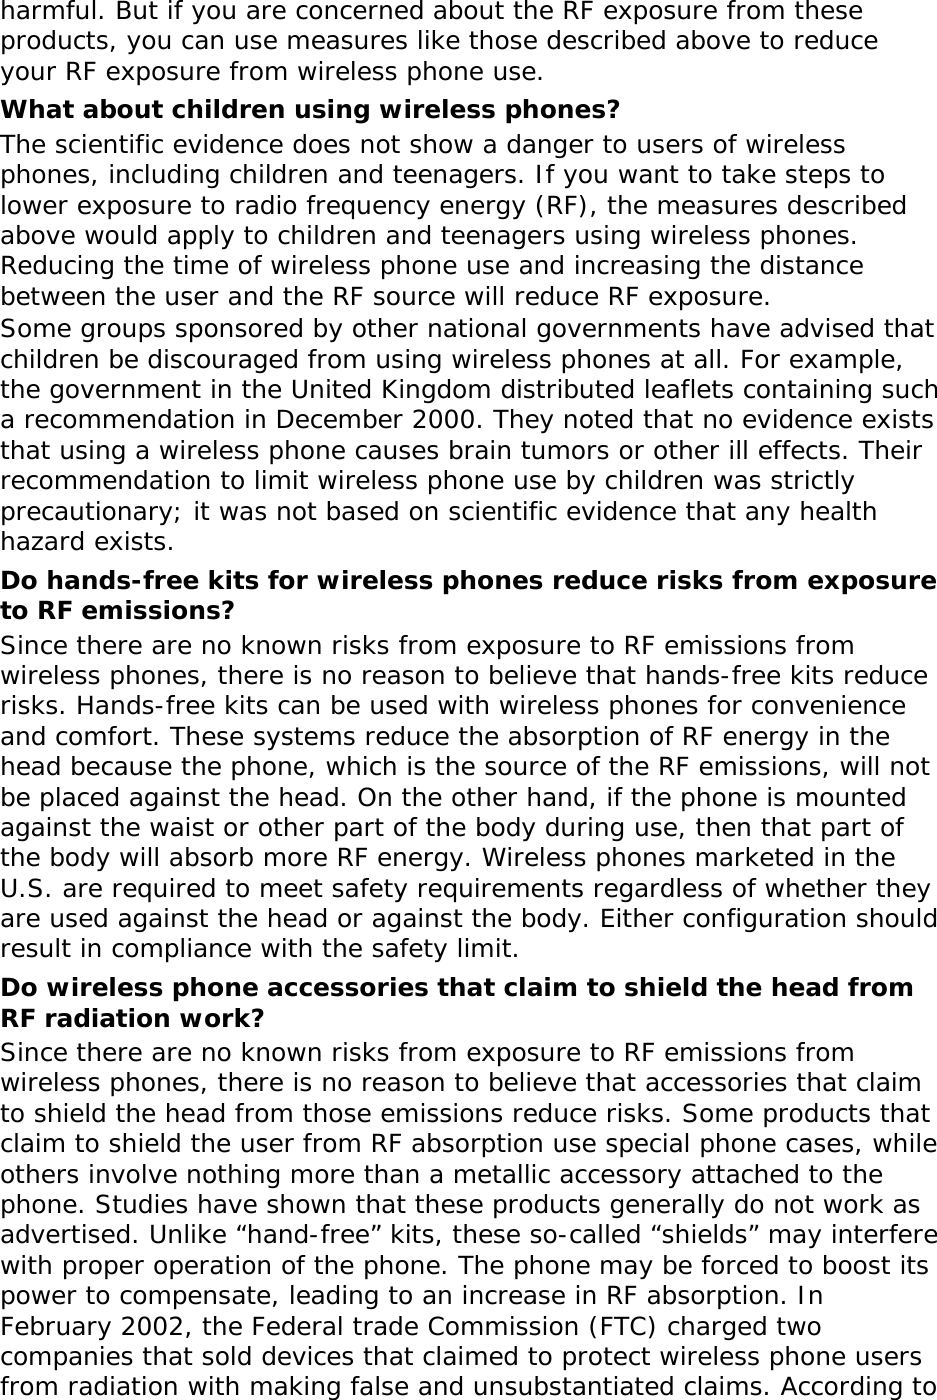 harmful. But if you are concerned about the RF exposure from these products, you can use measures like those described above to reduce your RF exposure from wireless phone use. What about children using wireless phones? The scientific evidence does not show a danger to users of wireless phones, including children and teenagers. If you want to take steps to lower exposure to radio frequency energy (RF), the measures described above would apply to children and teenagers using wireless phones. Reducing the time of wireless phone use and increasing the distance between the user and the RF source will reduce RF exposure. Some groups sponsored by other national governments have advised that children be discouraged from using wireless phones at all. For example, the government in the United Kingdom distributed leaflets containing such a recommendation in December 2000. They noted that no evidence exists that using a wireless phone causes brain tumors or other ill effects. Their recommendation to limit wireless phone use by children was strictly precautionary; it was not based on scientific evidence that any health hazard exists.  Do hands-free kits for wireless phones reduce risks from exposure to RF emissions? Since there are no known risks from exposure to RF emissions from wireless phones, there is no reason to believe that hands-free kits reduce risks. Hands-free kits can be used with wireless phones for convenience and comfort. These systems reduce the absorption of RF energy in the head because the phone, which is the source of the RF emissions, will not be placed against the head. On the other hand, if the phone is mounted against the waist or other part of the body during use, then that part of the body will absorb more RF energy. Wireless phones marketed in the U.S. are required to meet safety requirements regardless of whether they are used against the head or against the body. Either configuration should result in compliance with the safety limit. Do wireless phone accessories that claim to shield the head from RF radiation work? Since there are no known risks from exposure to RF emissions from wireless phones, there is no reason to believe that accessories that claim to shield the head from those emissions reduce risks. Some products that claim to shield the user from RF absorption use special phone cases, while others involve nothing more than a metallic accessory attached to the phone. Studies have shown that these products generally do not work as advertised. Unlike “hand-free” kits, these so-called “shields” may interfere with proper operation of the phone. The phone may be forced to boost its power to compensate, leading to an increase in RF absorption. In February 2002, the Federal trade Commission (FTC) charged two companies that sold devices that claimed to protect wireless phone users from radiation with making false and unsubstantiated claims. According to 